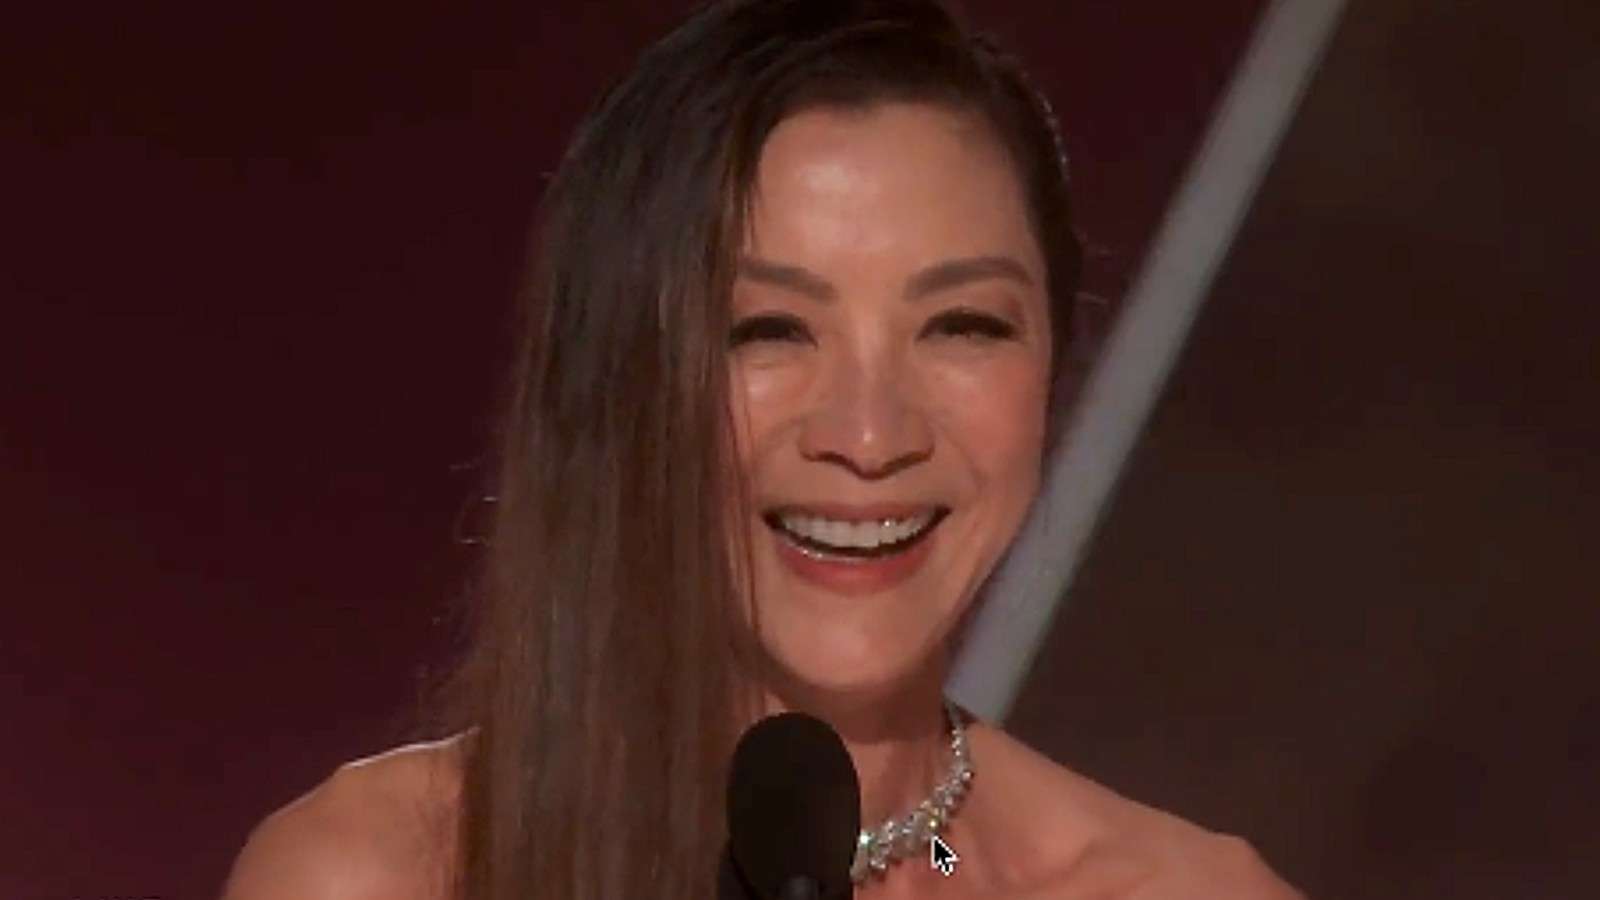 Michelle Yeoh at the Golden Globes